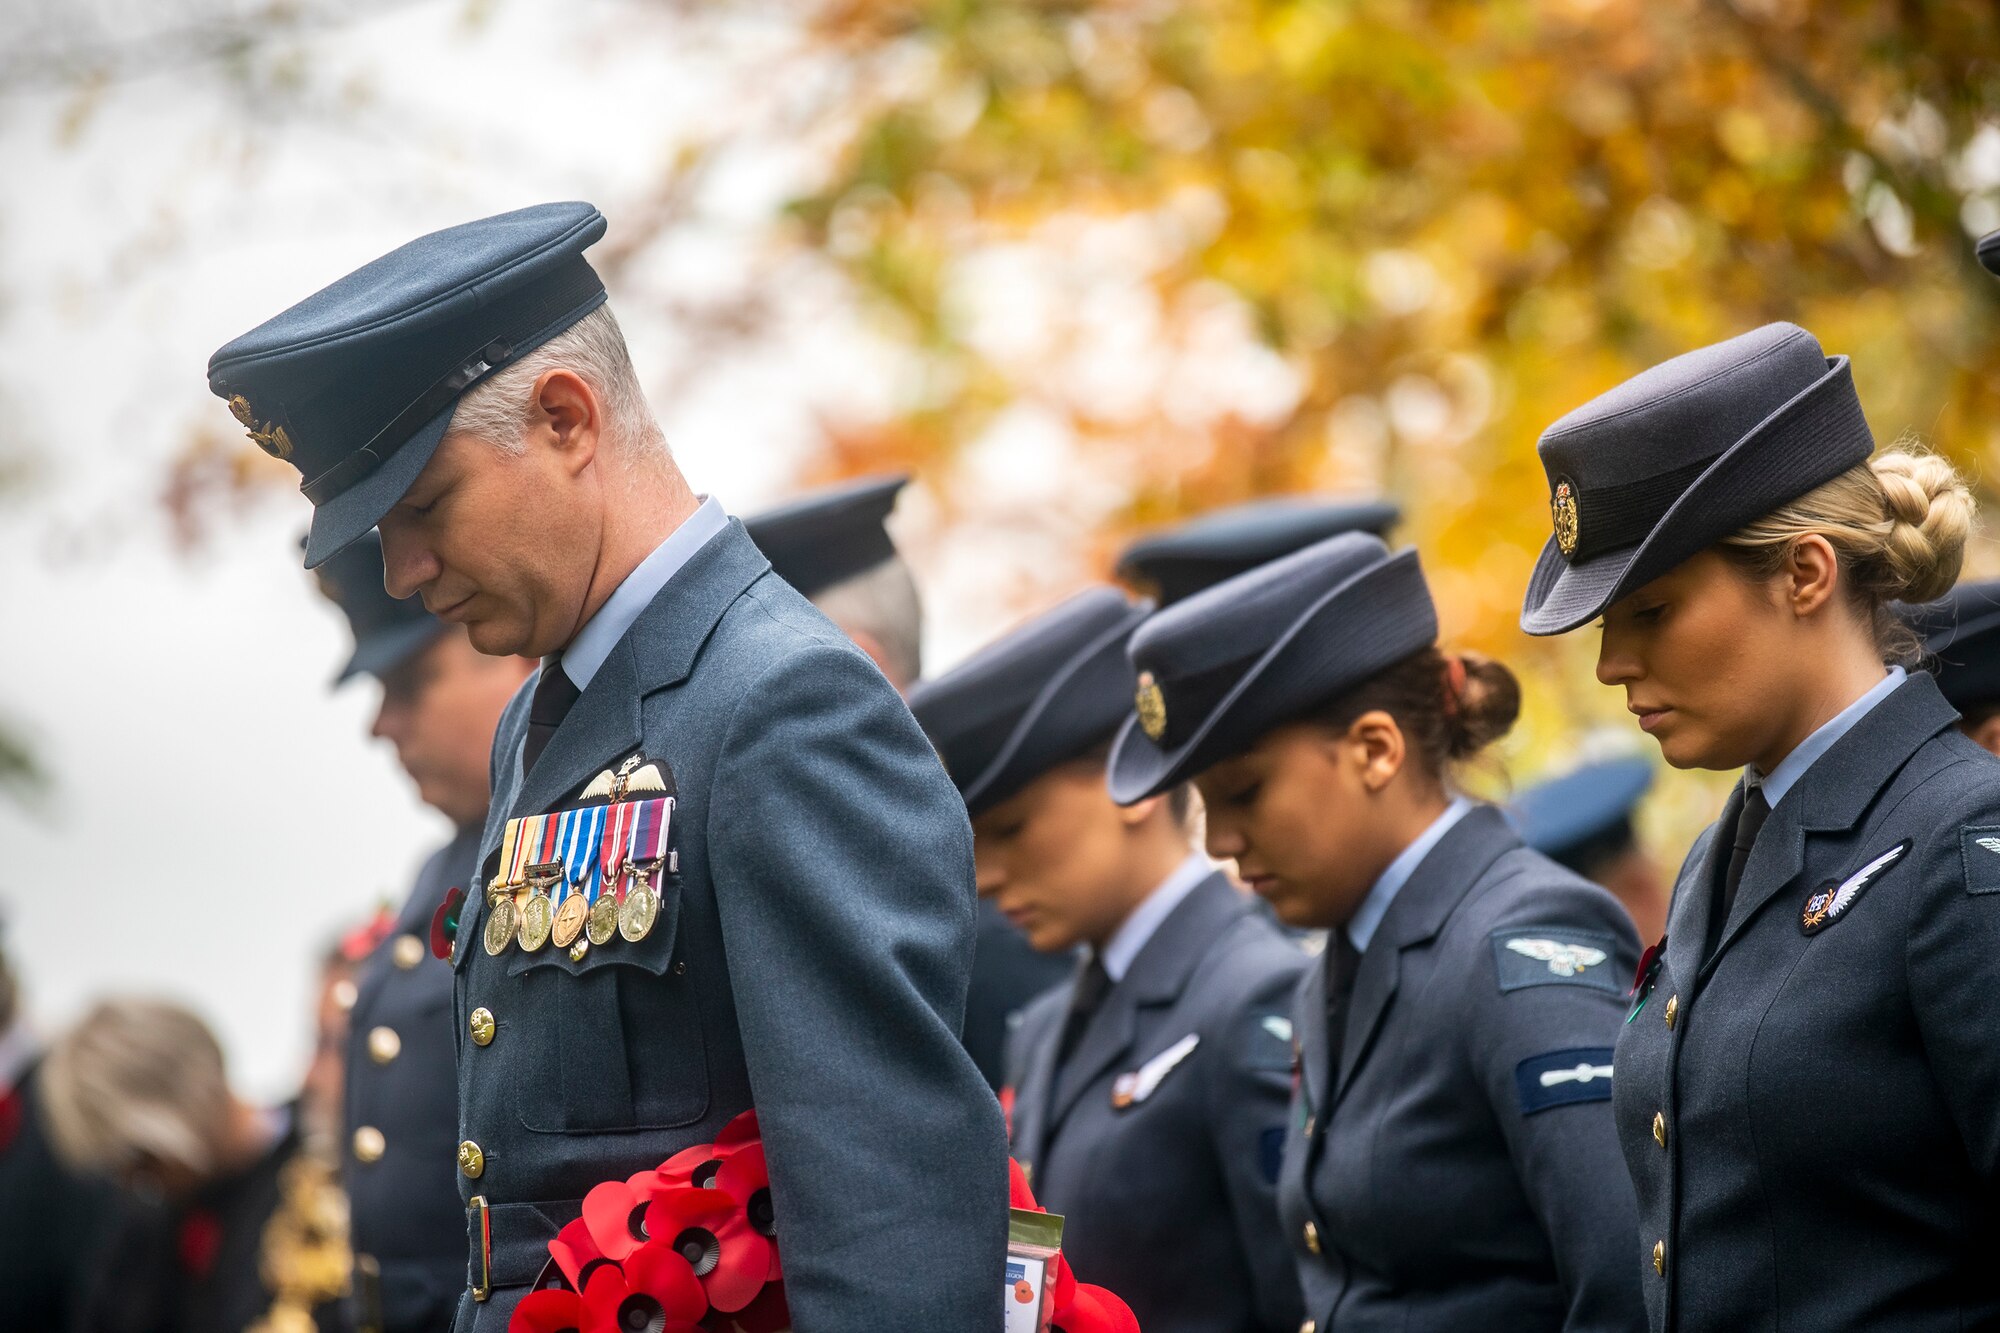 Members of the Royal Air Force bow their heads during a Remembrance Day ceremony at RAF Welford, England, Nov. 10, 2022. Airmen from the 501st Combat Support Wing, RAF, and distinguished guests came together to honor the sacrifices of armed forces veterans, past and present. (U.S. Air Force photo by Staff Sgt. Eugene Oliver)